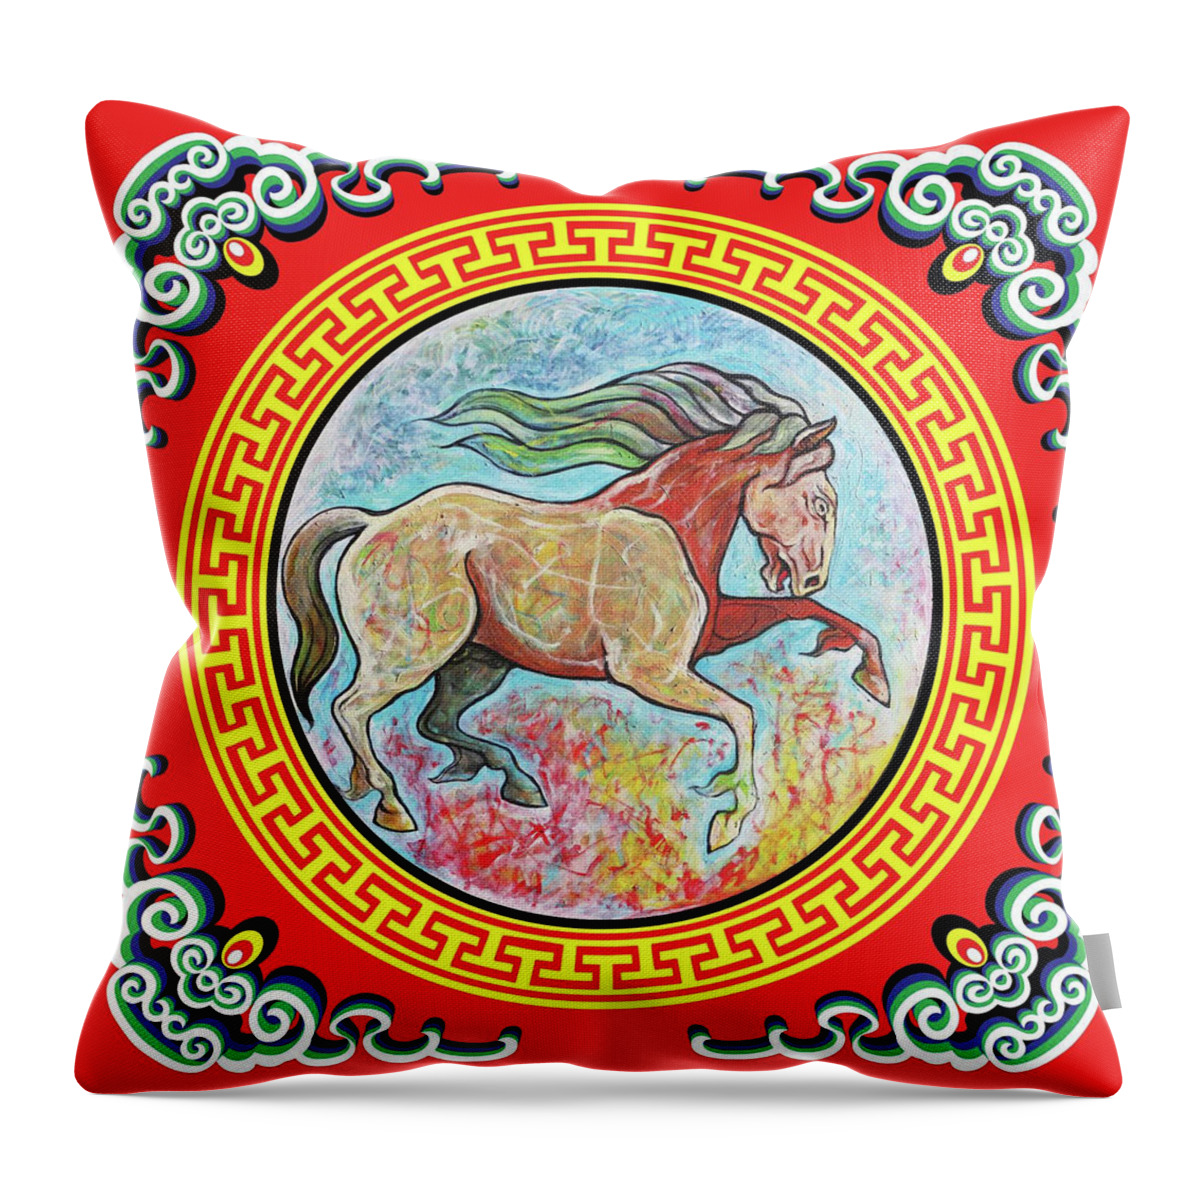 The Year Of The Horse Throw Pillow featuring the painting The Year of the Horse by Tom Dashnyam Otgontugs